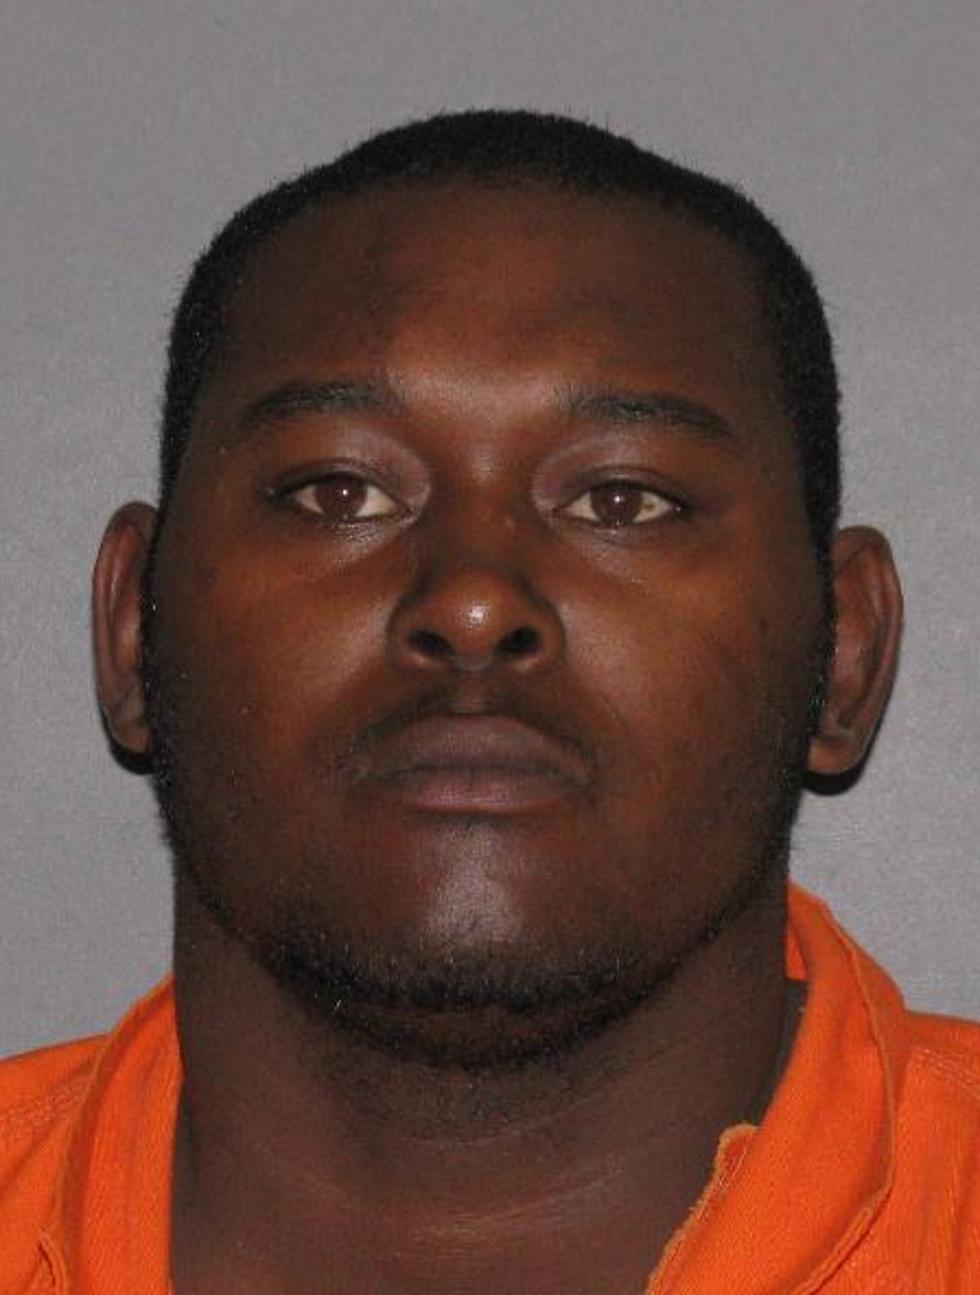 Father Allegedly Murders 11-Month-Old Baby, Claims He Messed Up